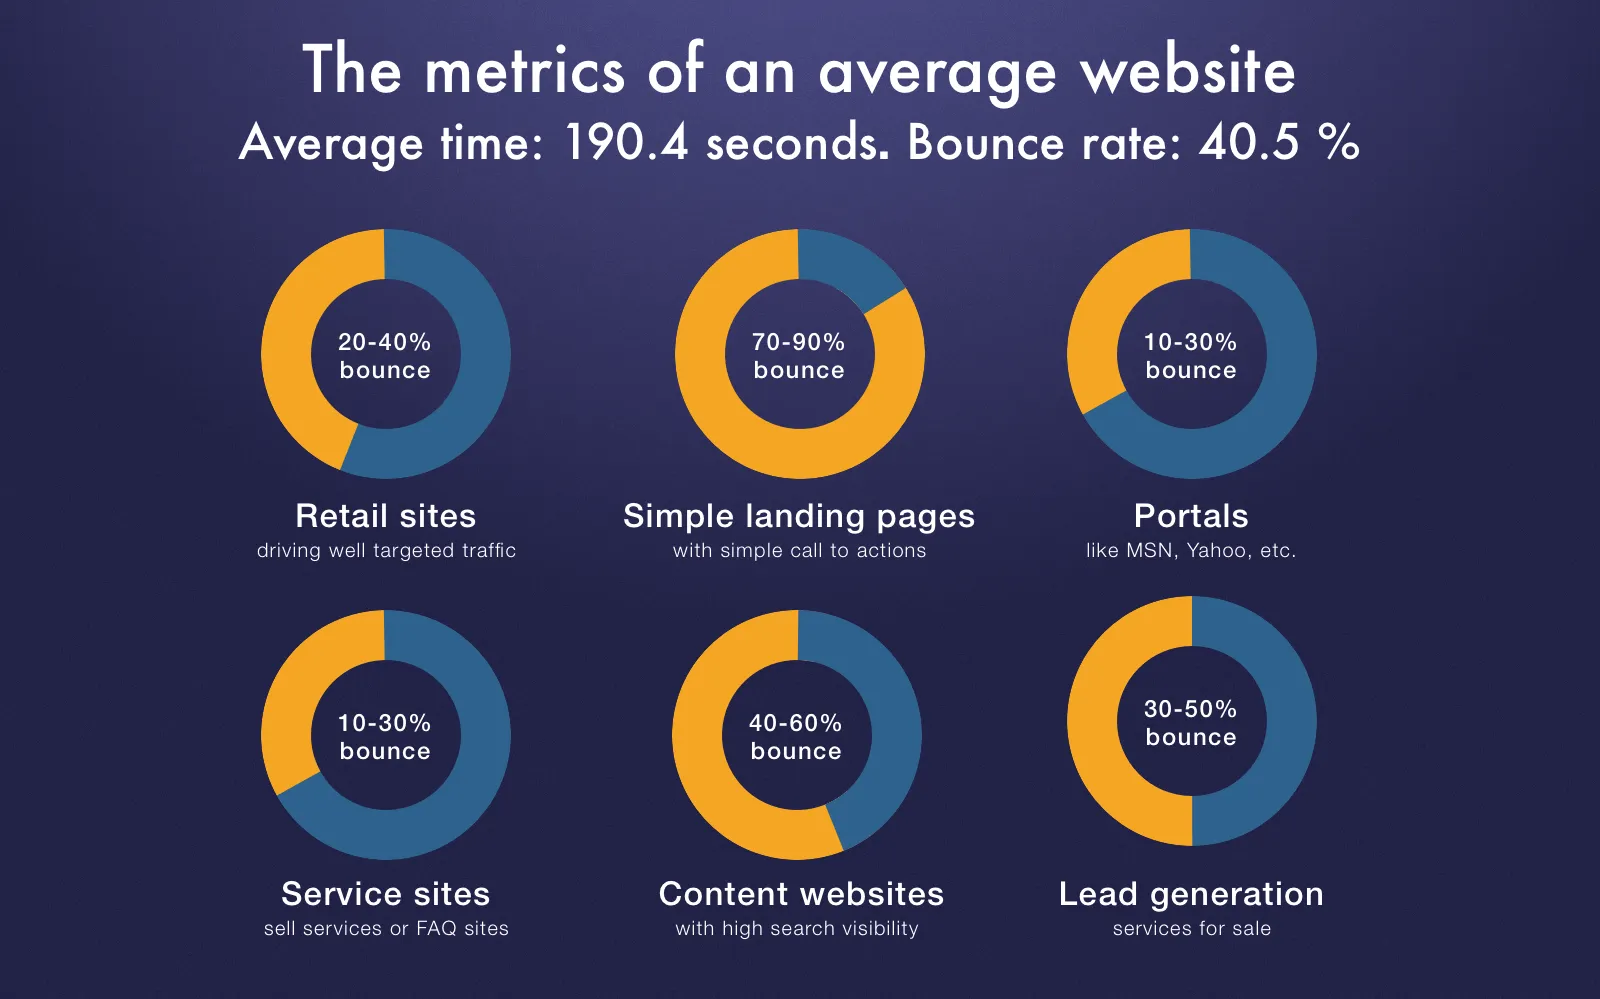 Bounce rate and website type